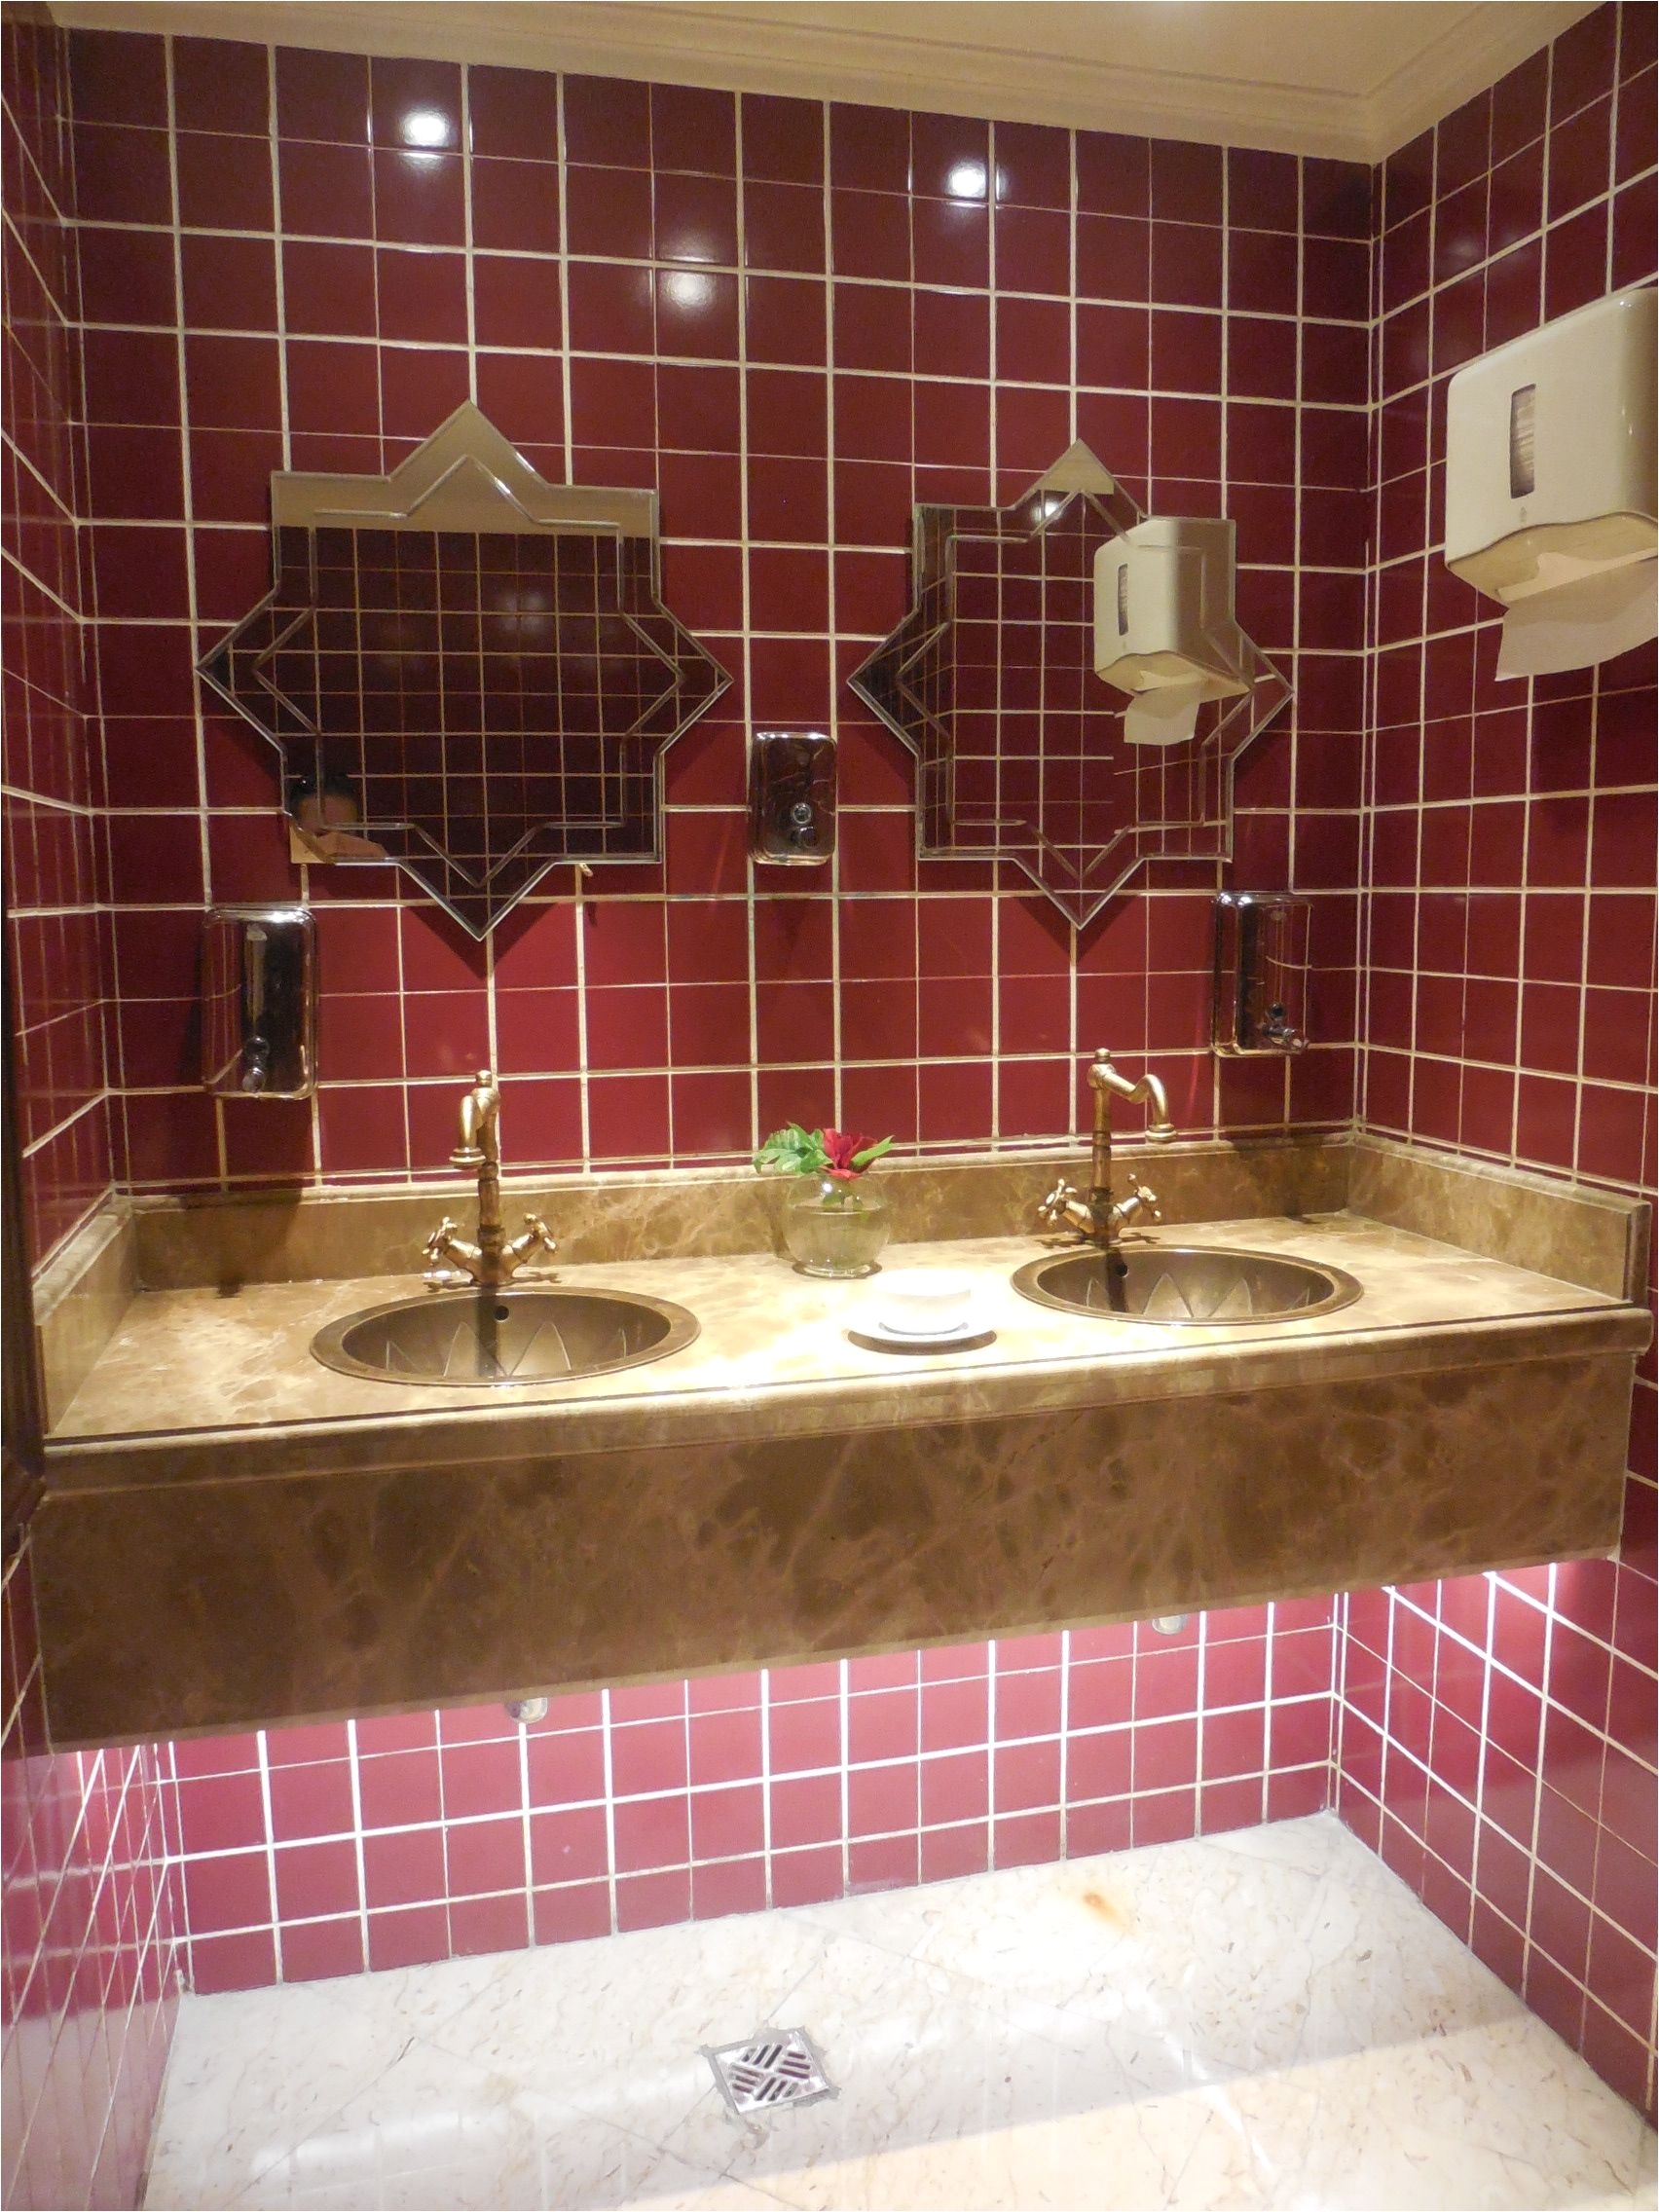 Oriental Star bathroom with red tiles